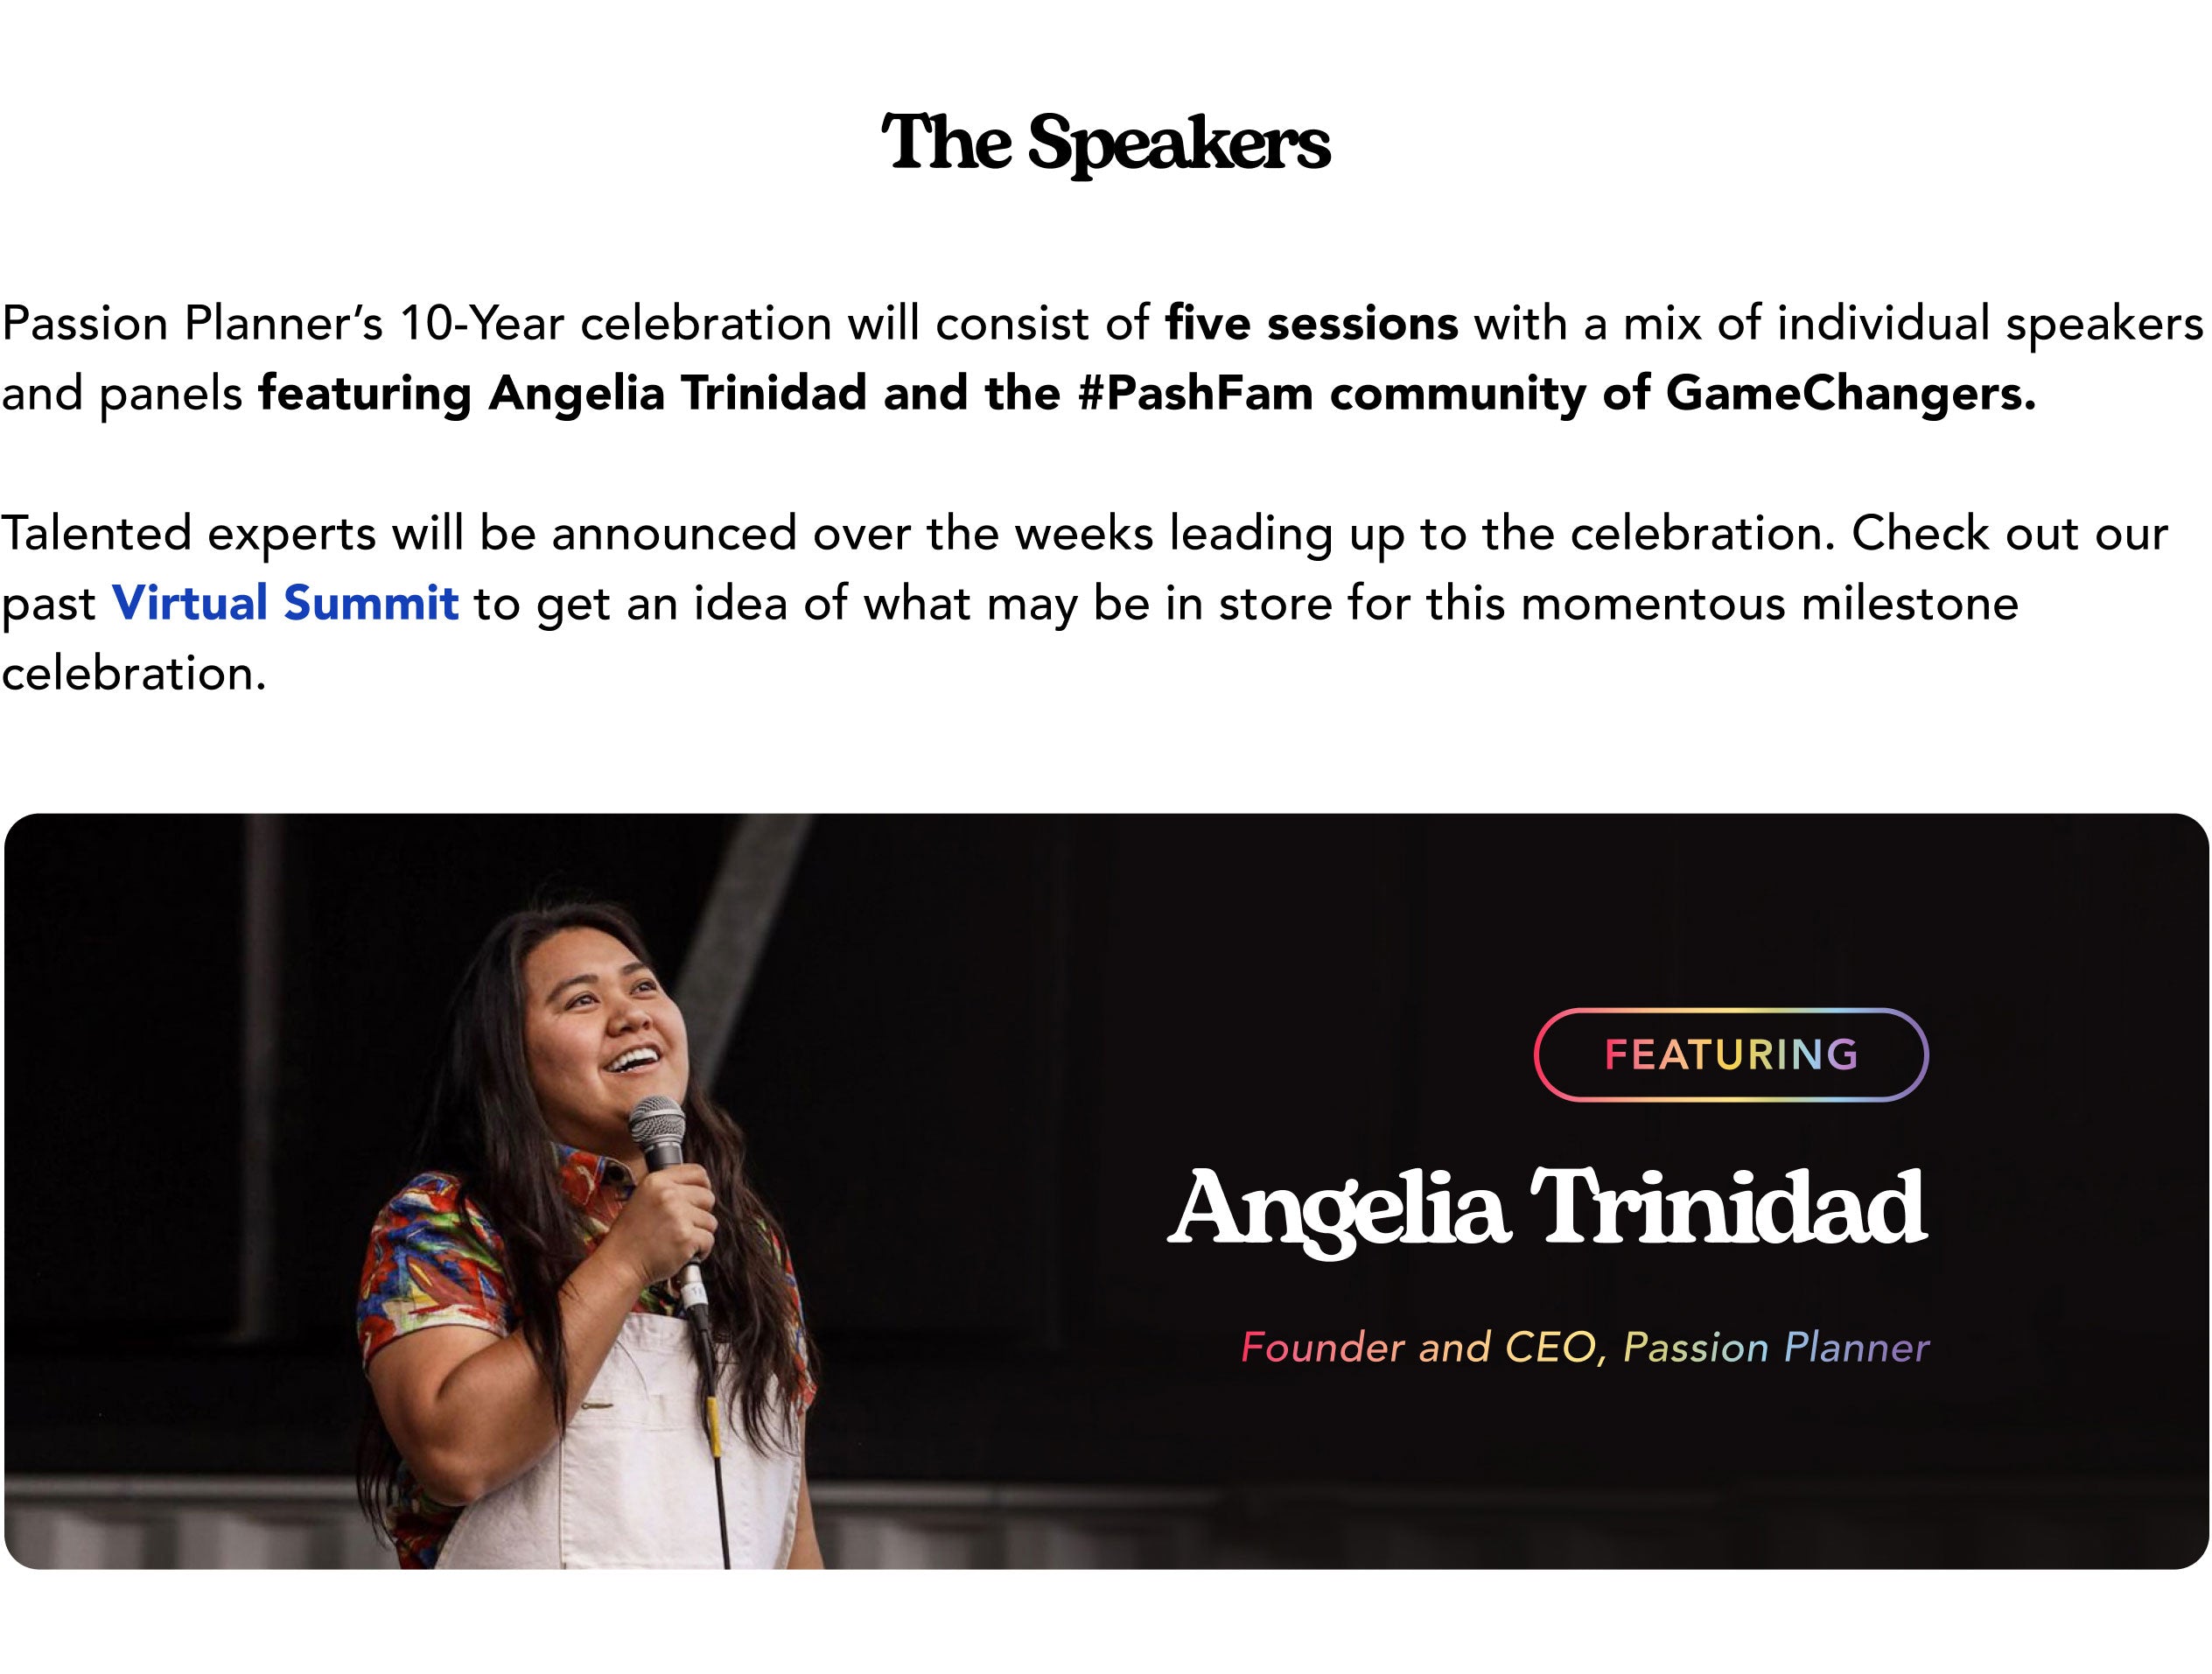 Passion Planner’s 10-year celebration will consist of five sessions with a mix of individual speakers and panels featuring Angelia Trinidad and the #PashFam community of GameChangers. Talented experts will be announced over the weeks leading up to the celebration. Check out our past Virtual Summit to get an idea of what may be in store for this momentous milestone celebration.